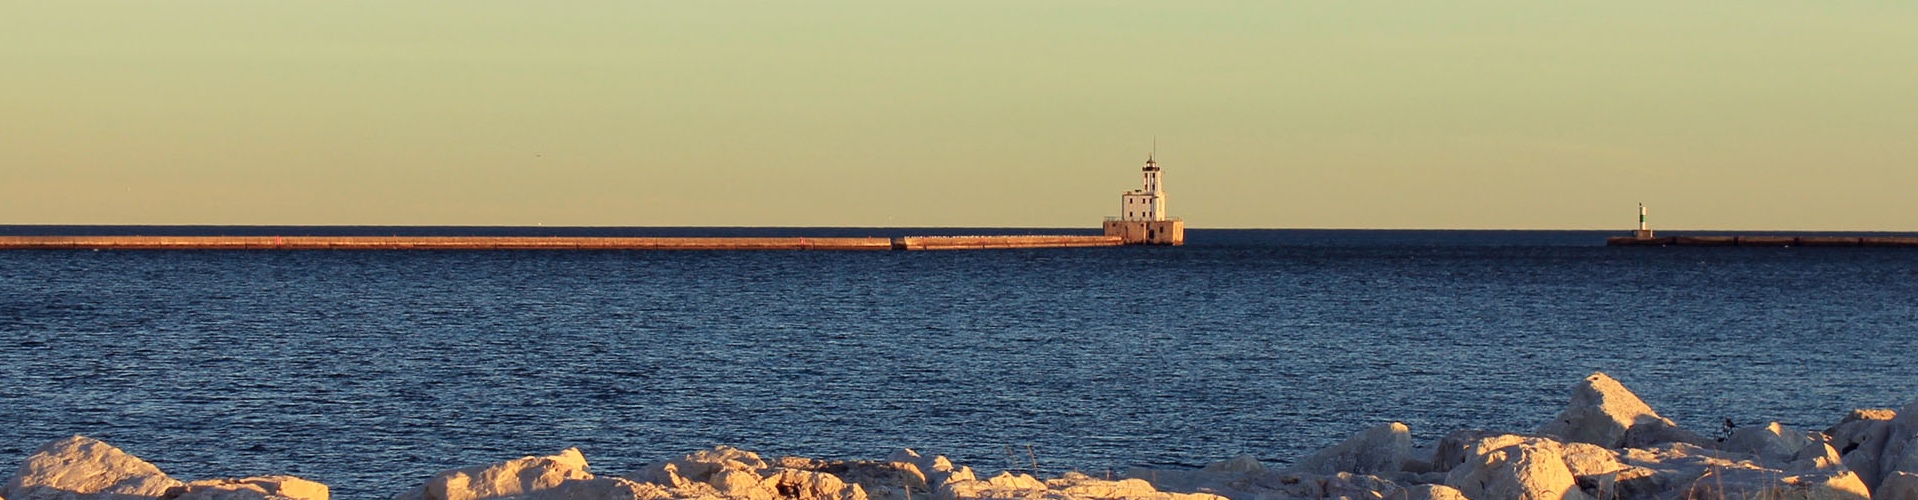 The Great Lakes of Wisconsin include Lake Michigan and Lake Superior.